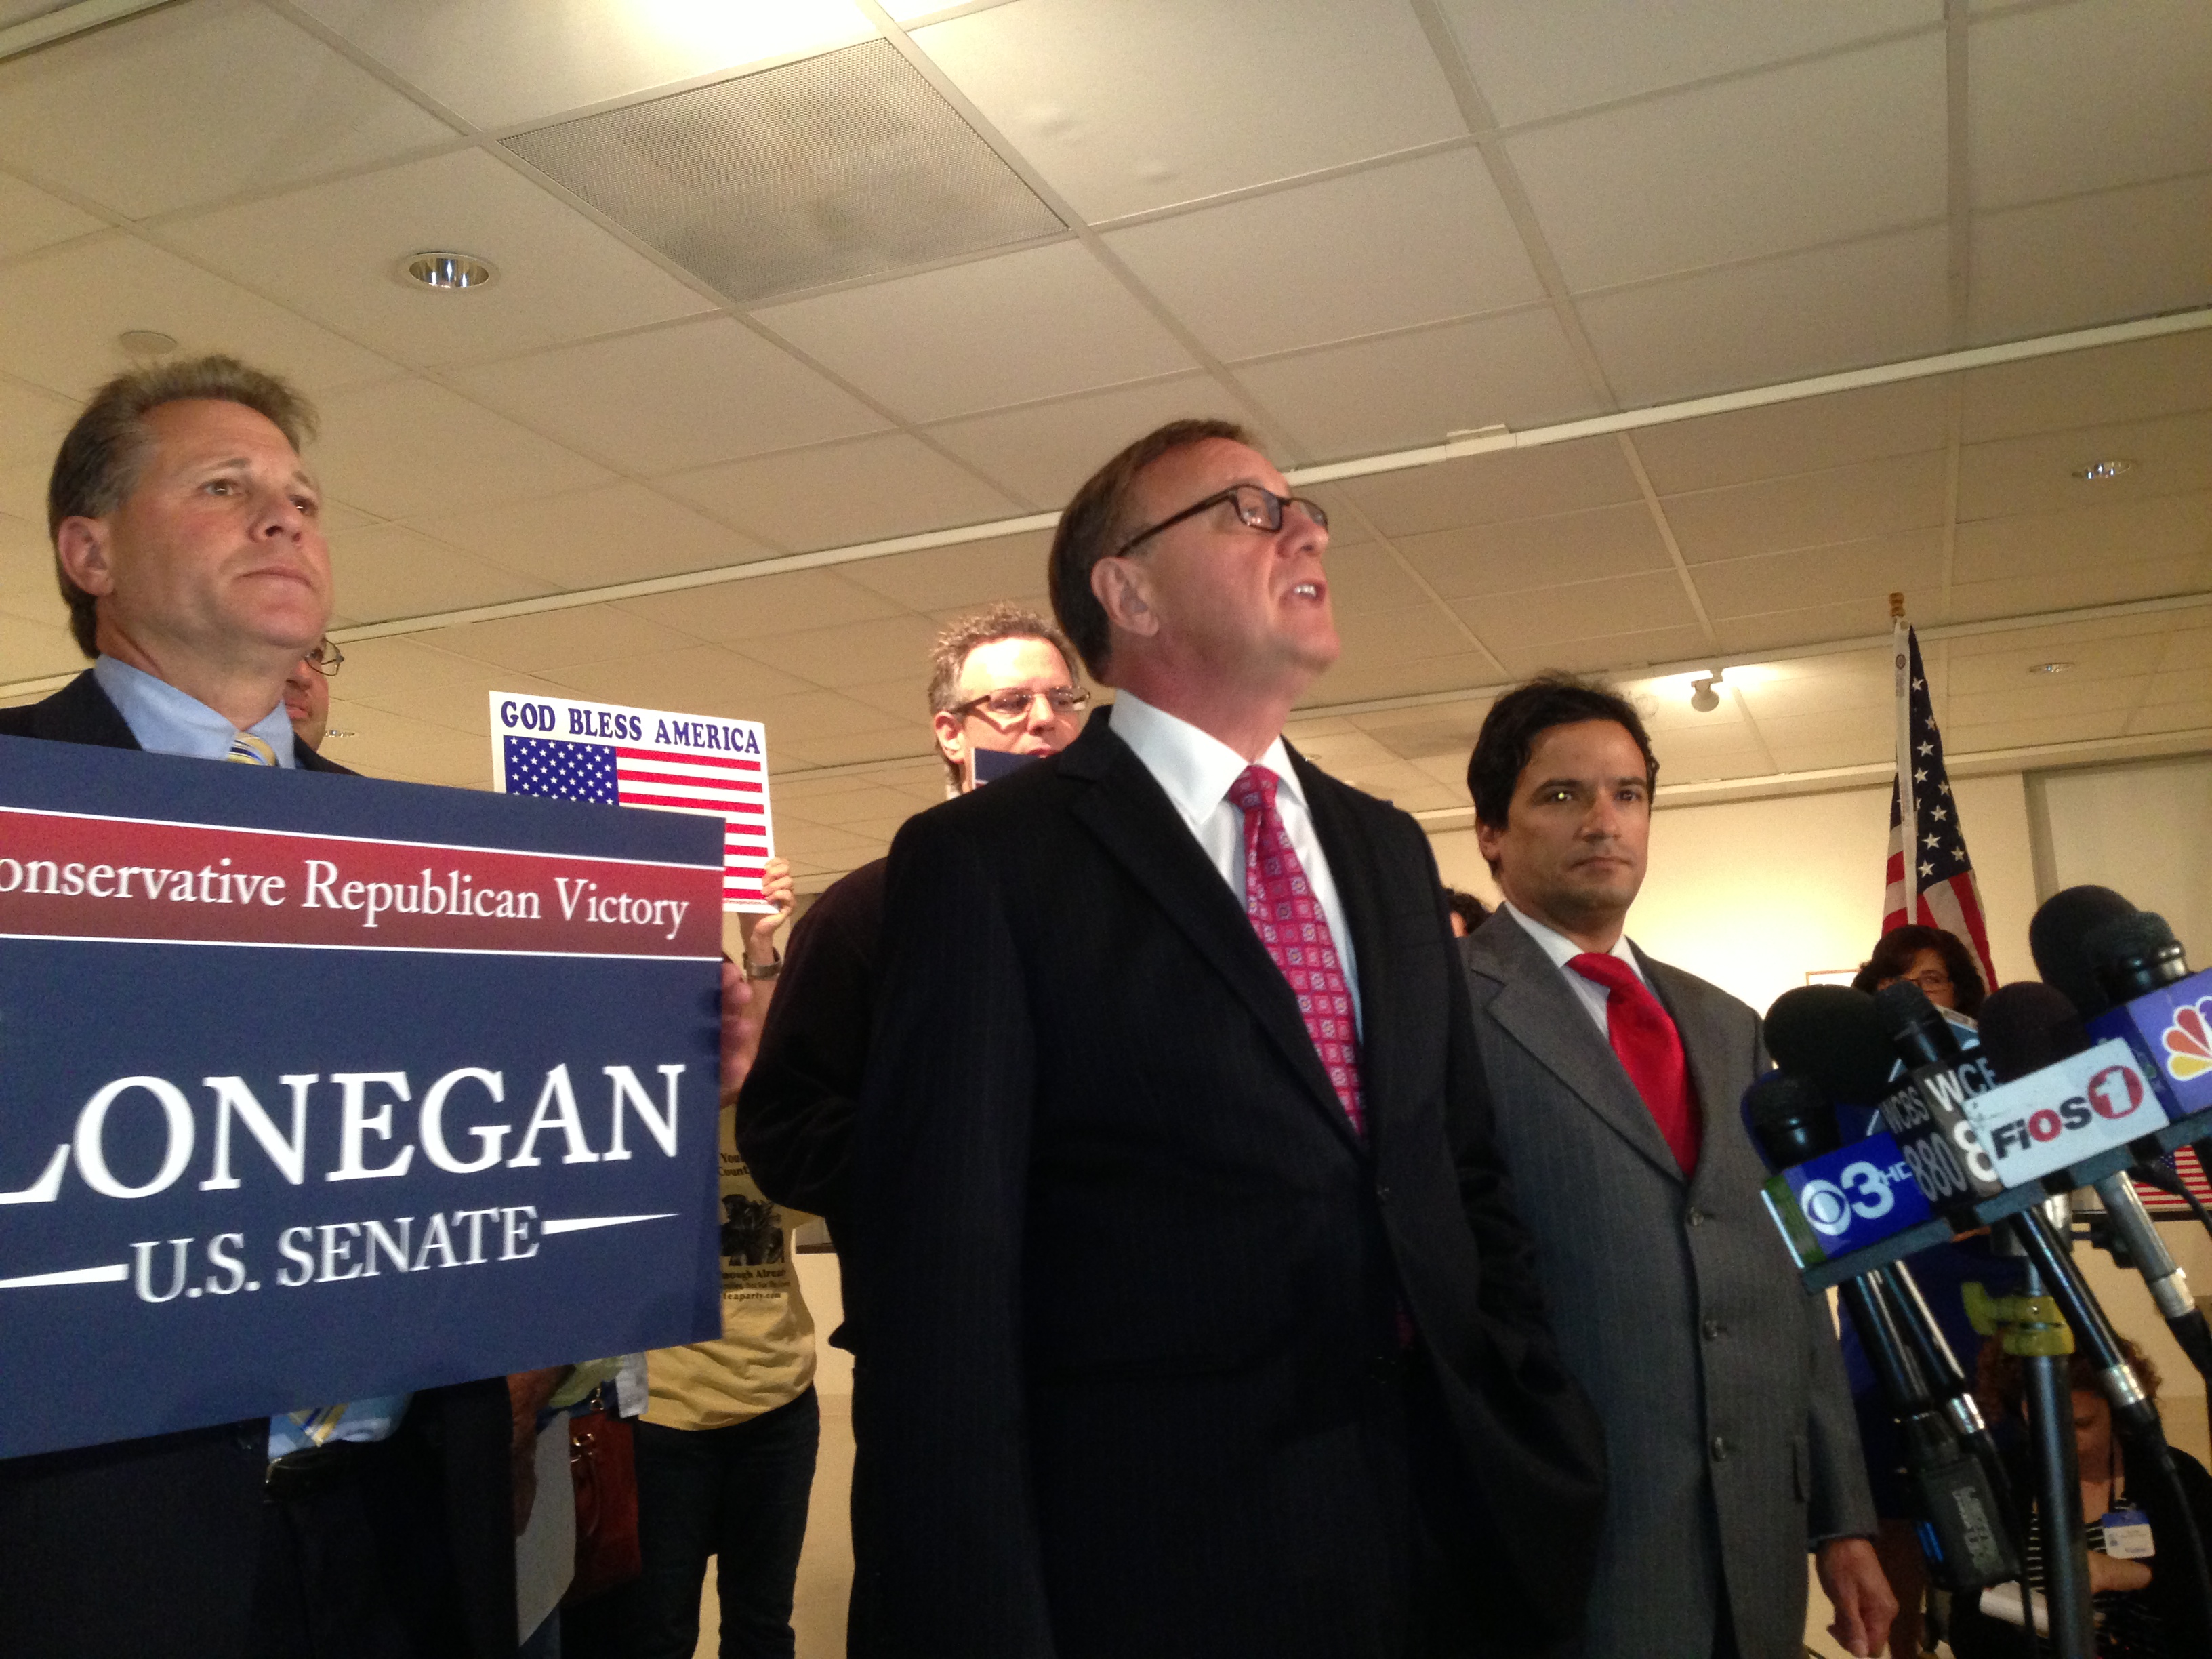 Steve Lonegan announcing he has 7,200 signatures on petition for U.S. Senate seat. (credit: Peter Haskell/WCBS 880)